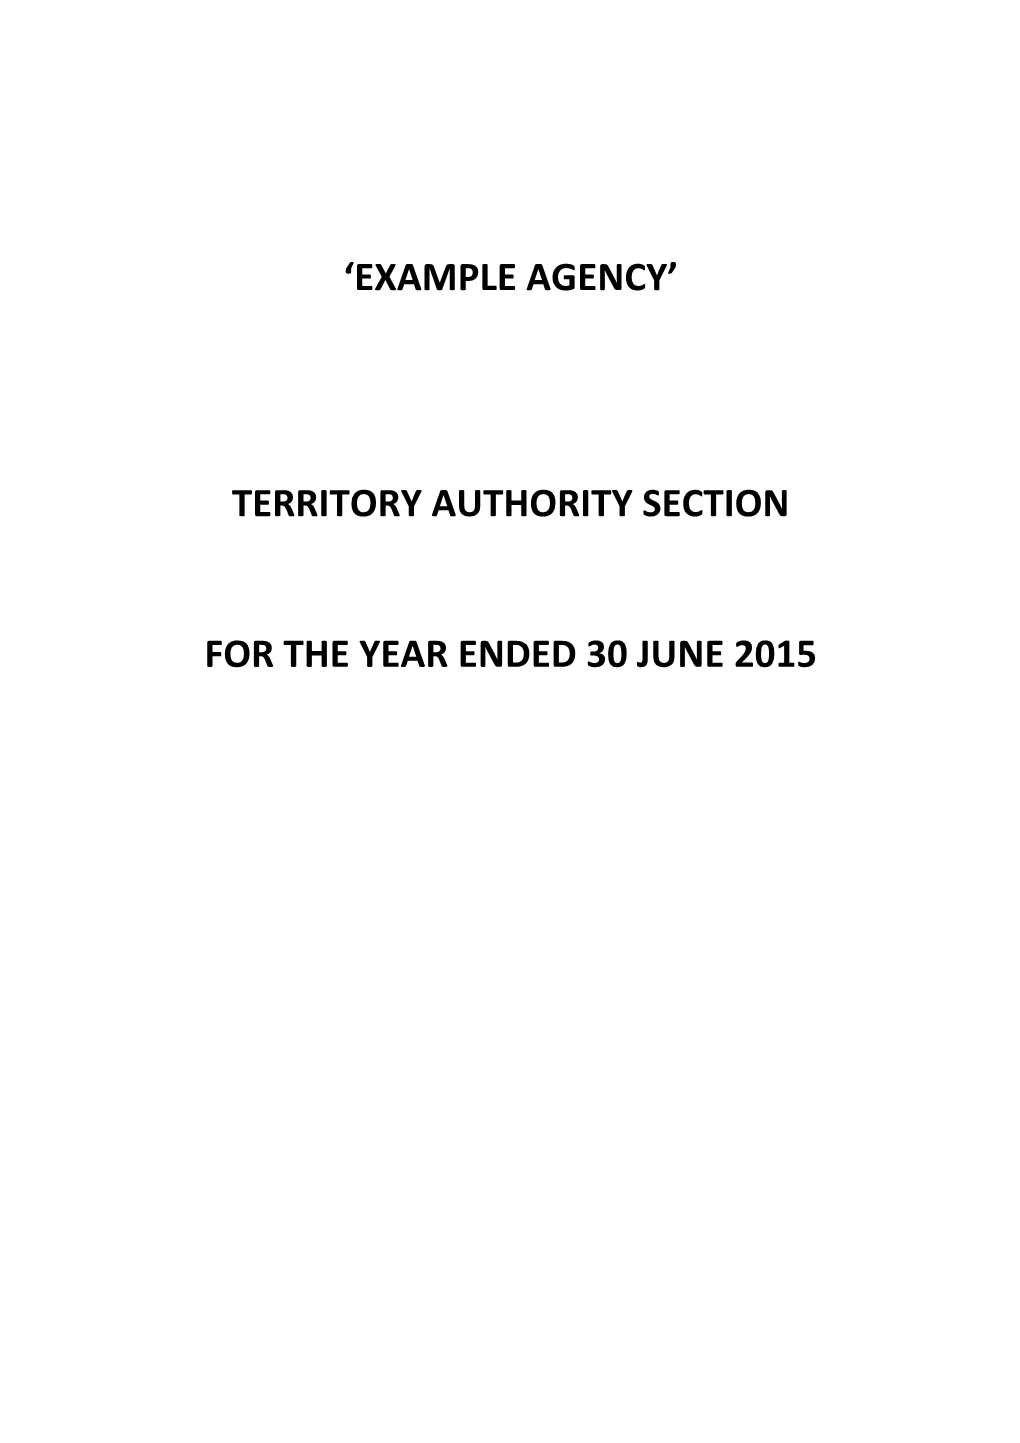 Territory Authority Section for the Model Financial Statements